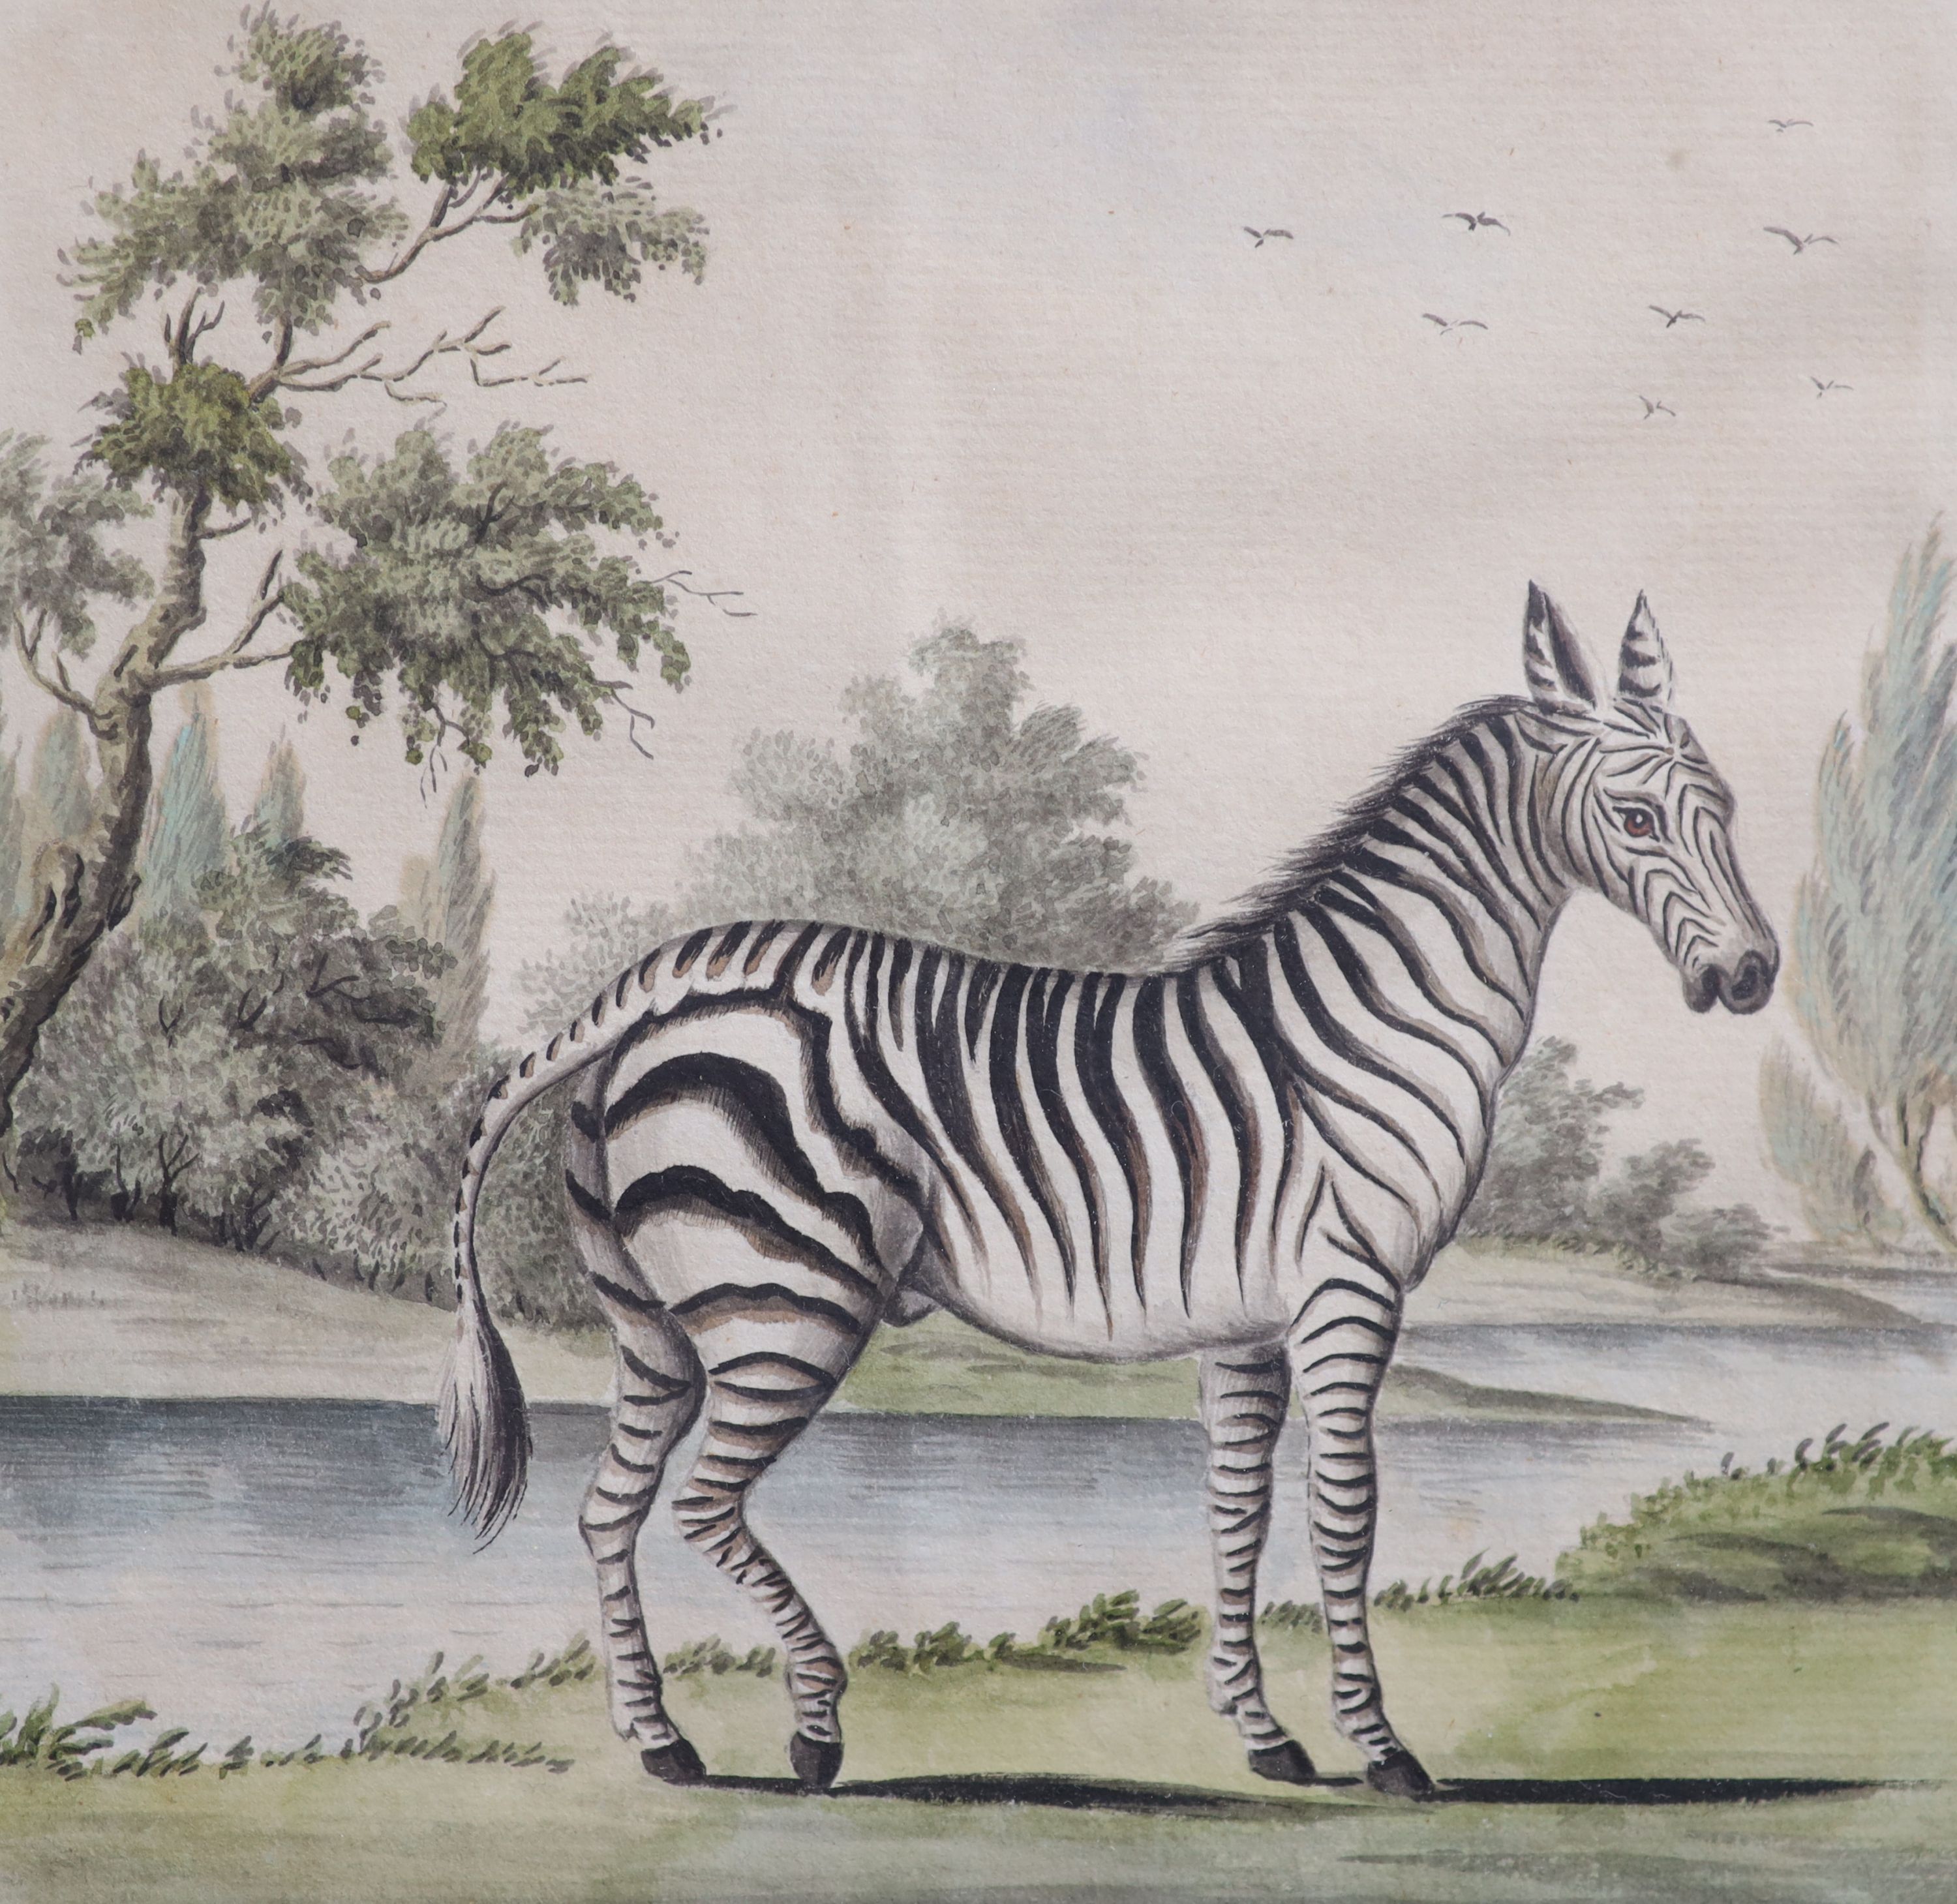 English School c.1780 , Zebra in a South African landscape, watercolour on paper, 15 x 15cm